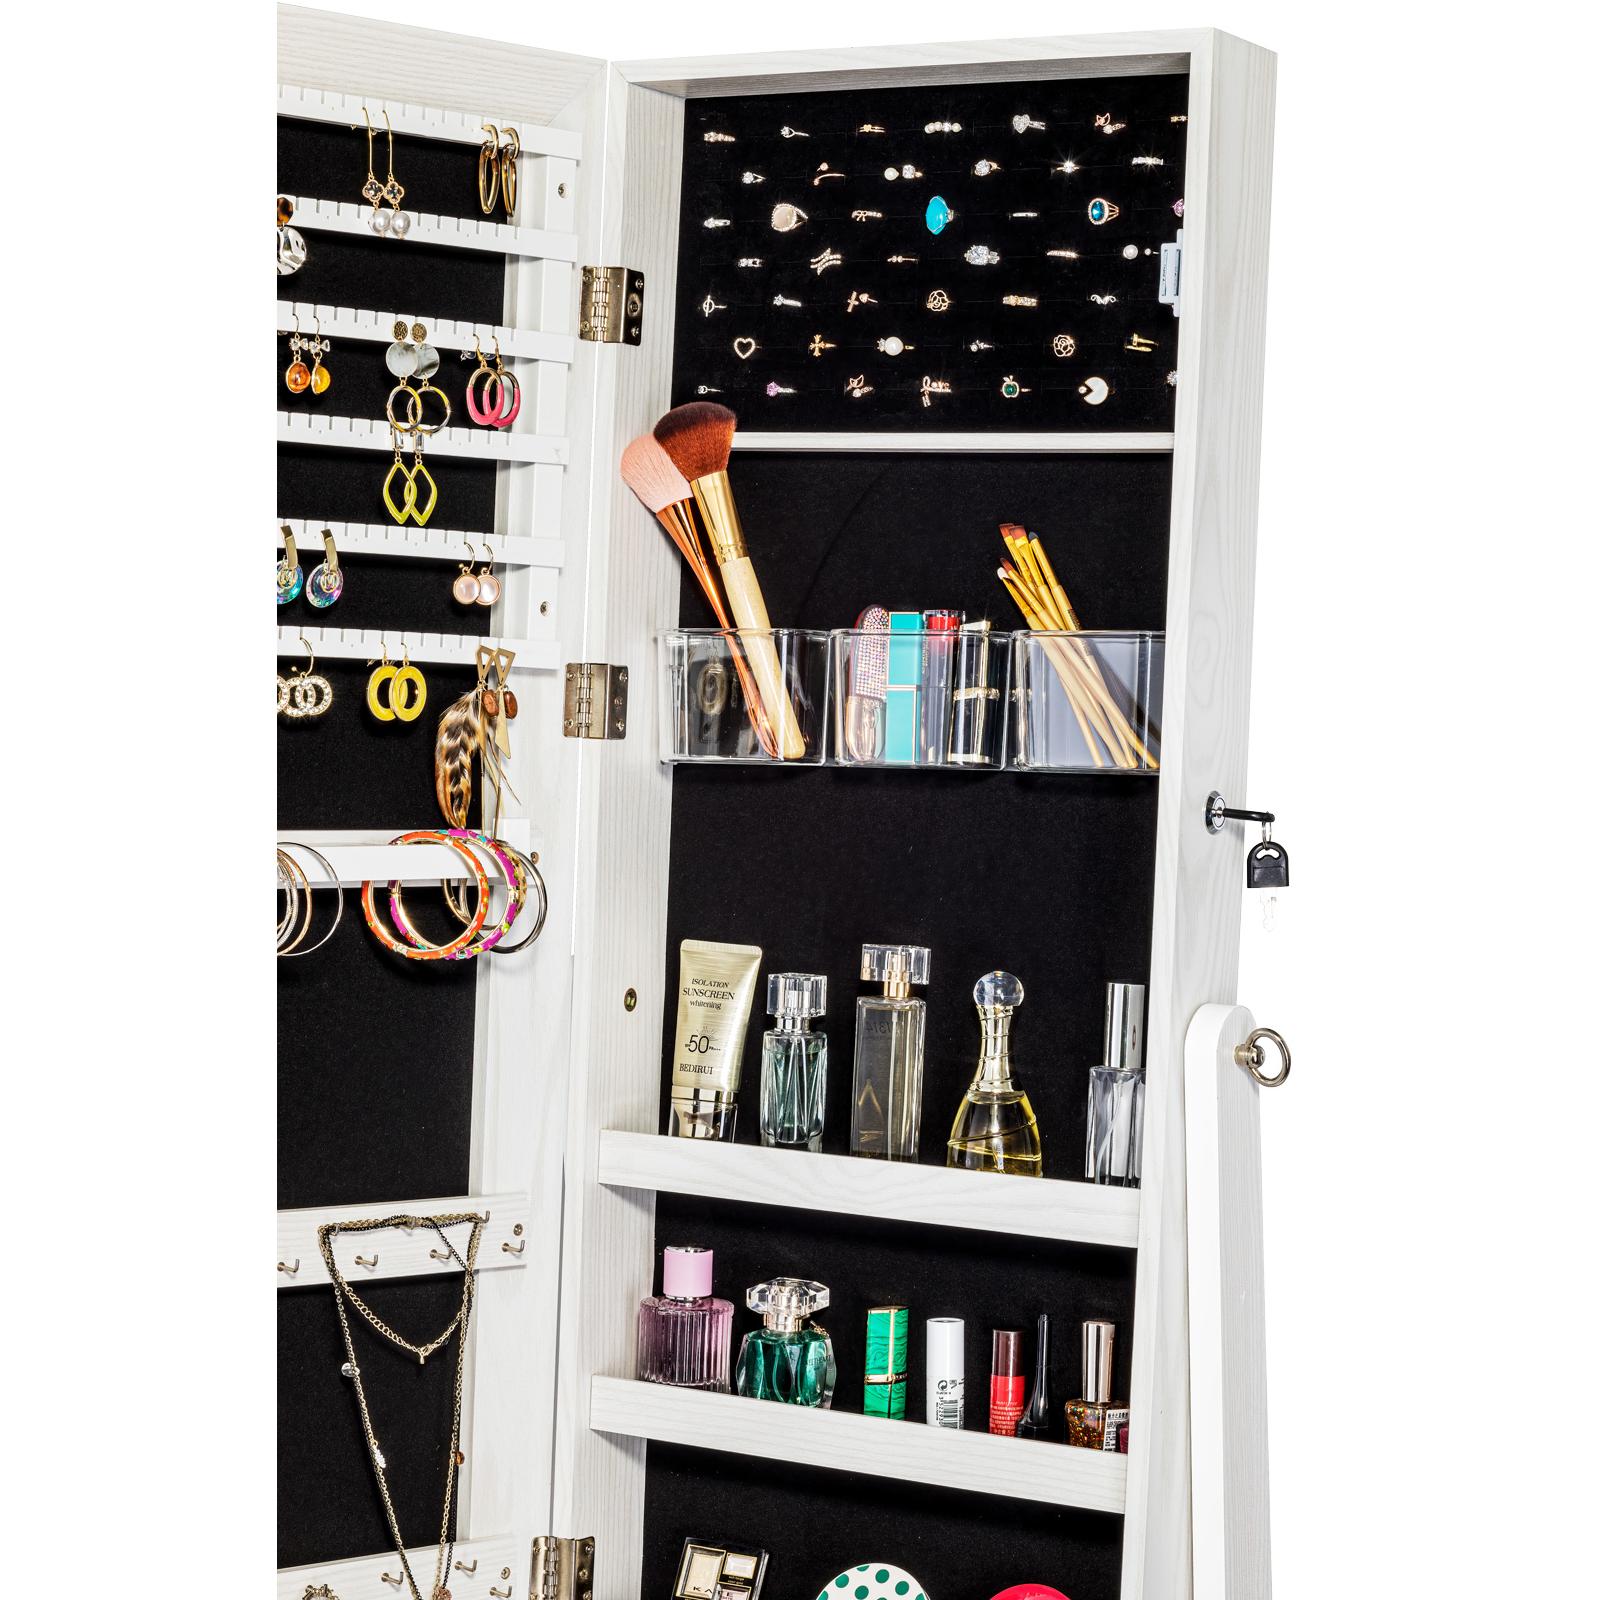 ViscoLogic Melanie Jewelry Armoire Makeup Mirrored Storage Cabinet for Cosmetics, Jewelry, Lockable Cabinet and Organizer With Dressing Mirror (White)